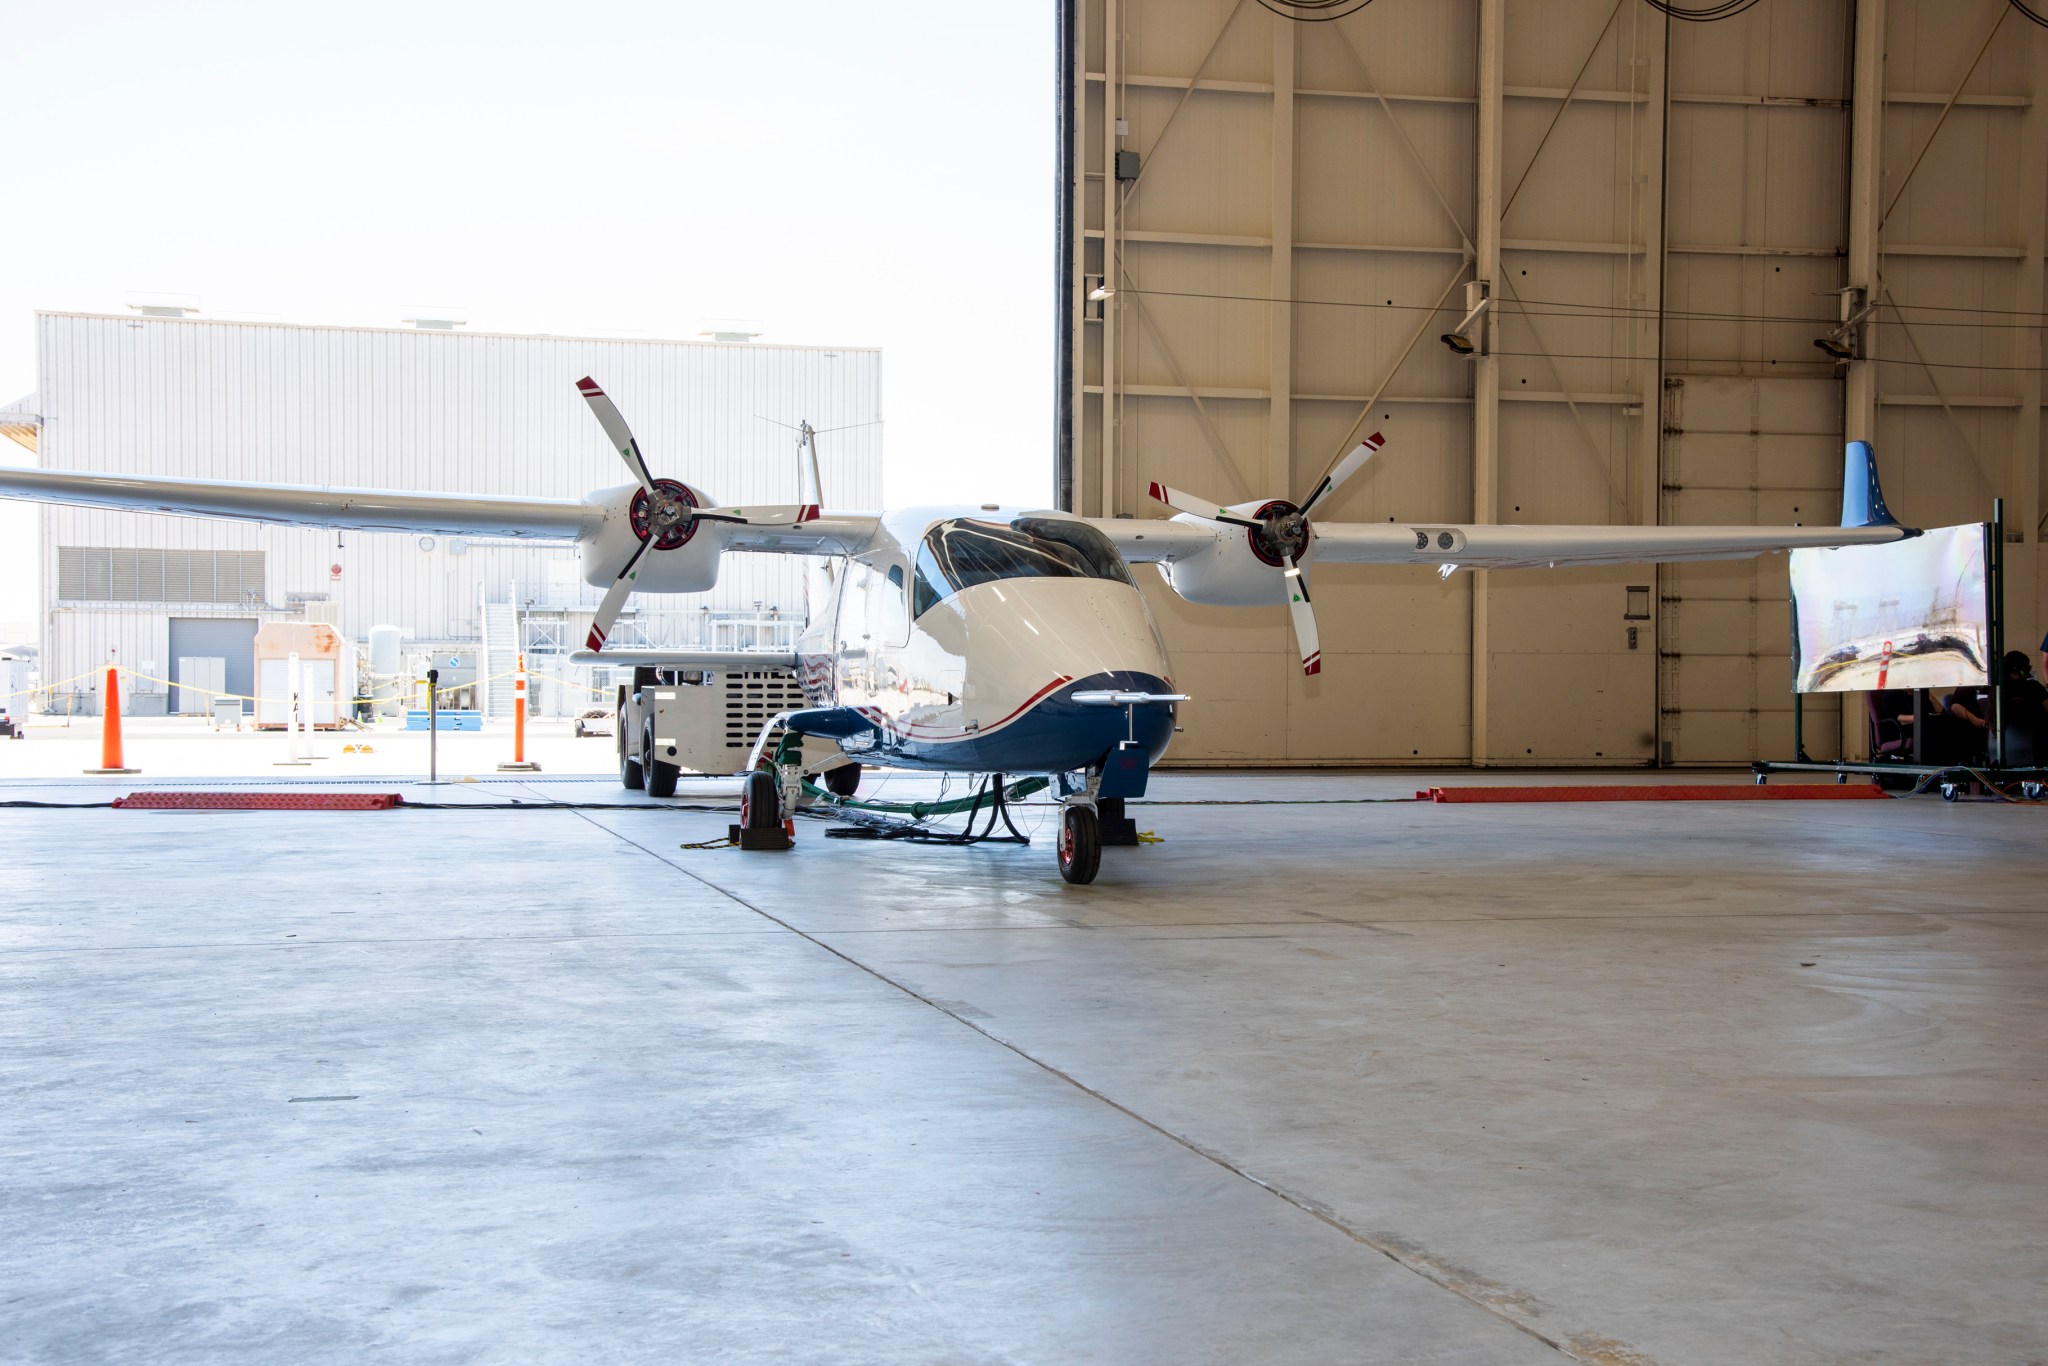 White and blue aircraft sits on concrete floor of airplane hangar attached to electric cables.